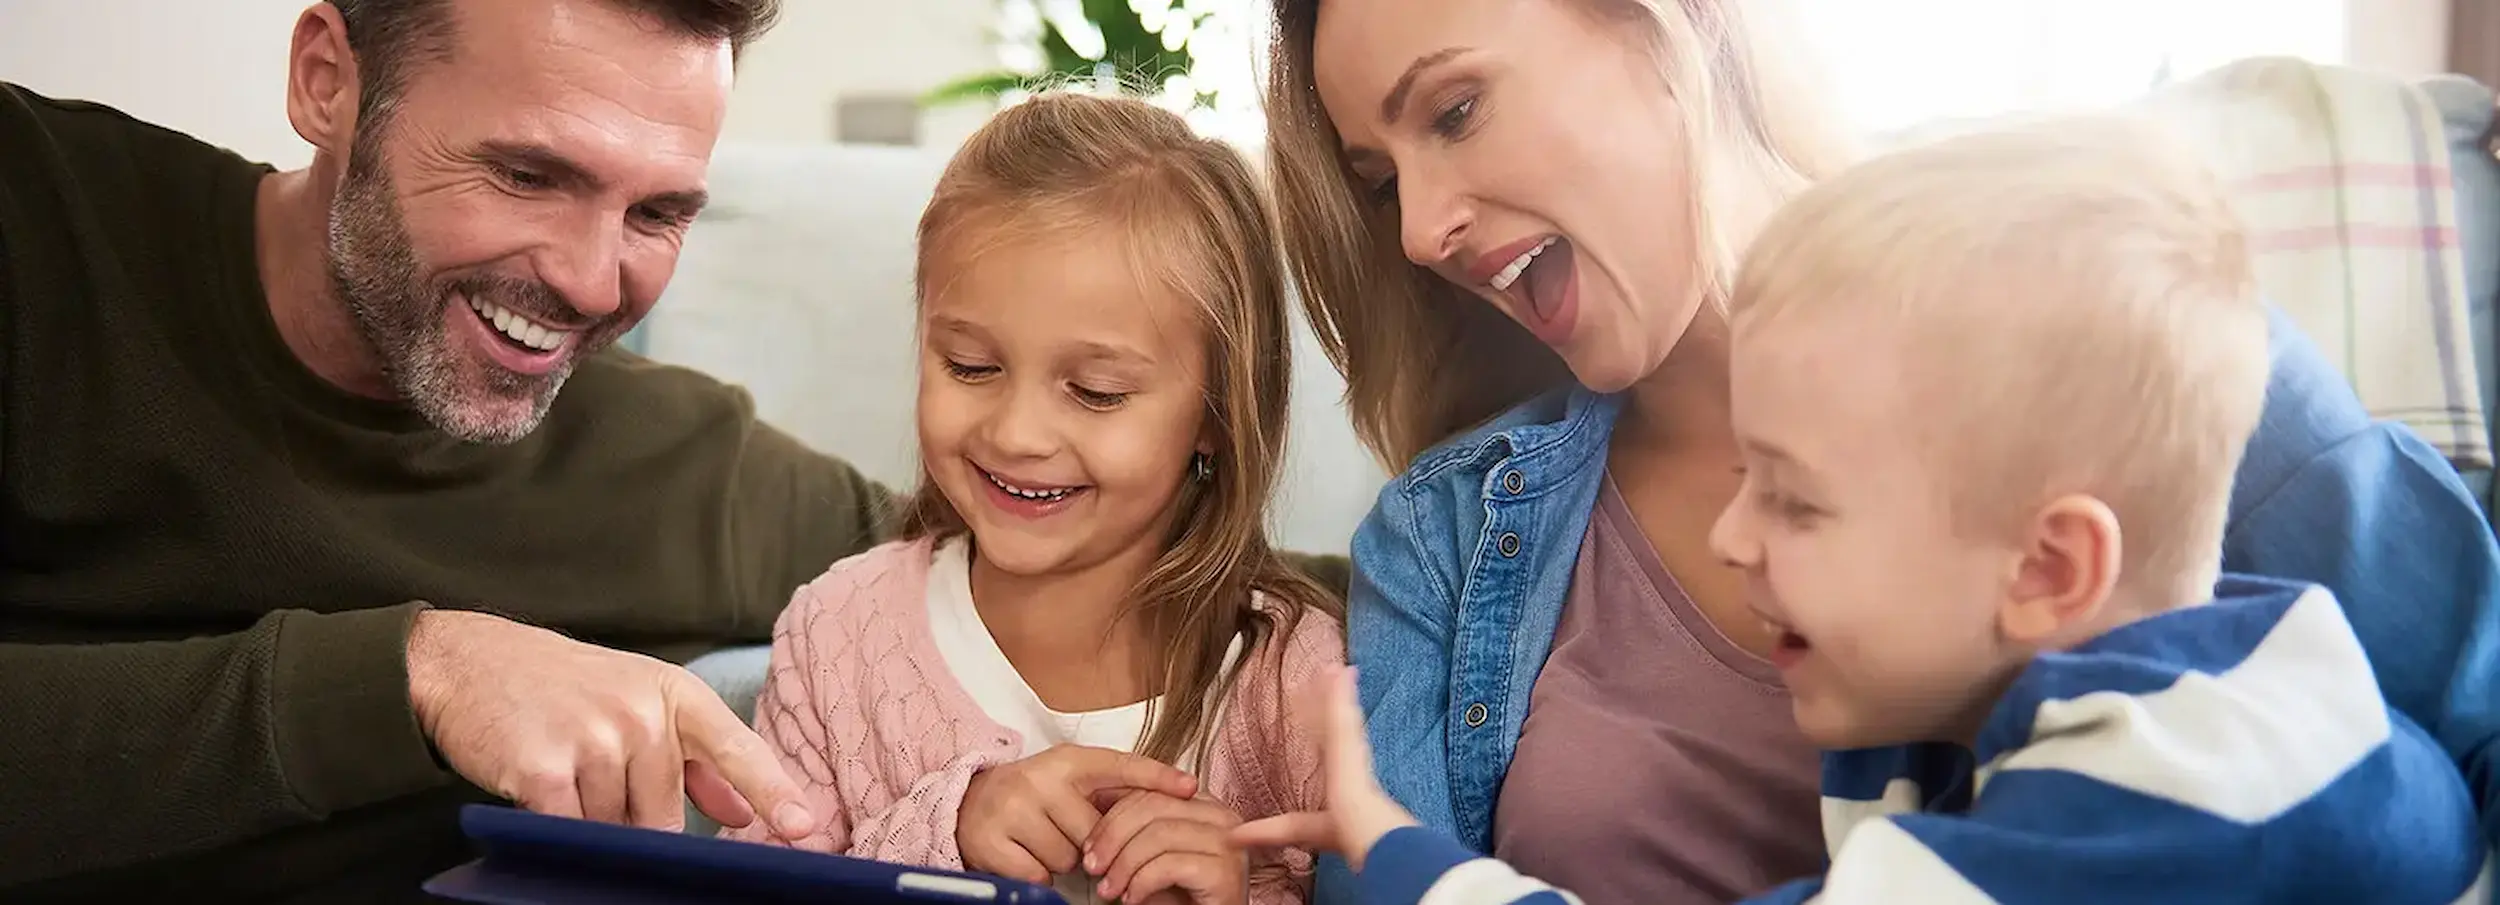 Smiling couple and two children pointing at tablet device in brightly lit living room interior.